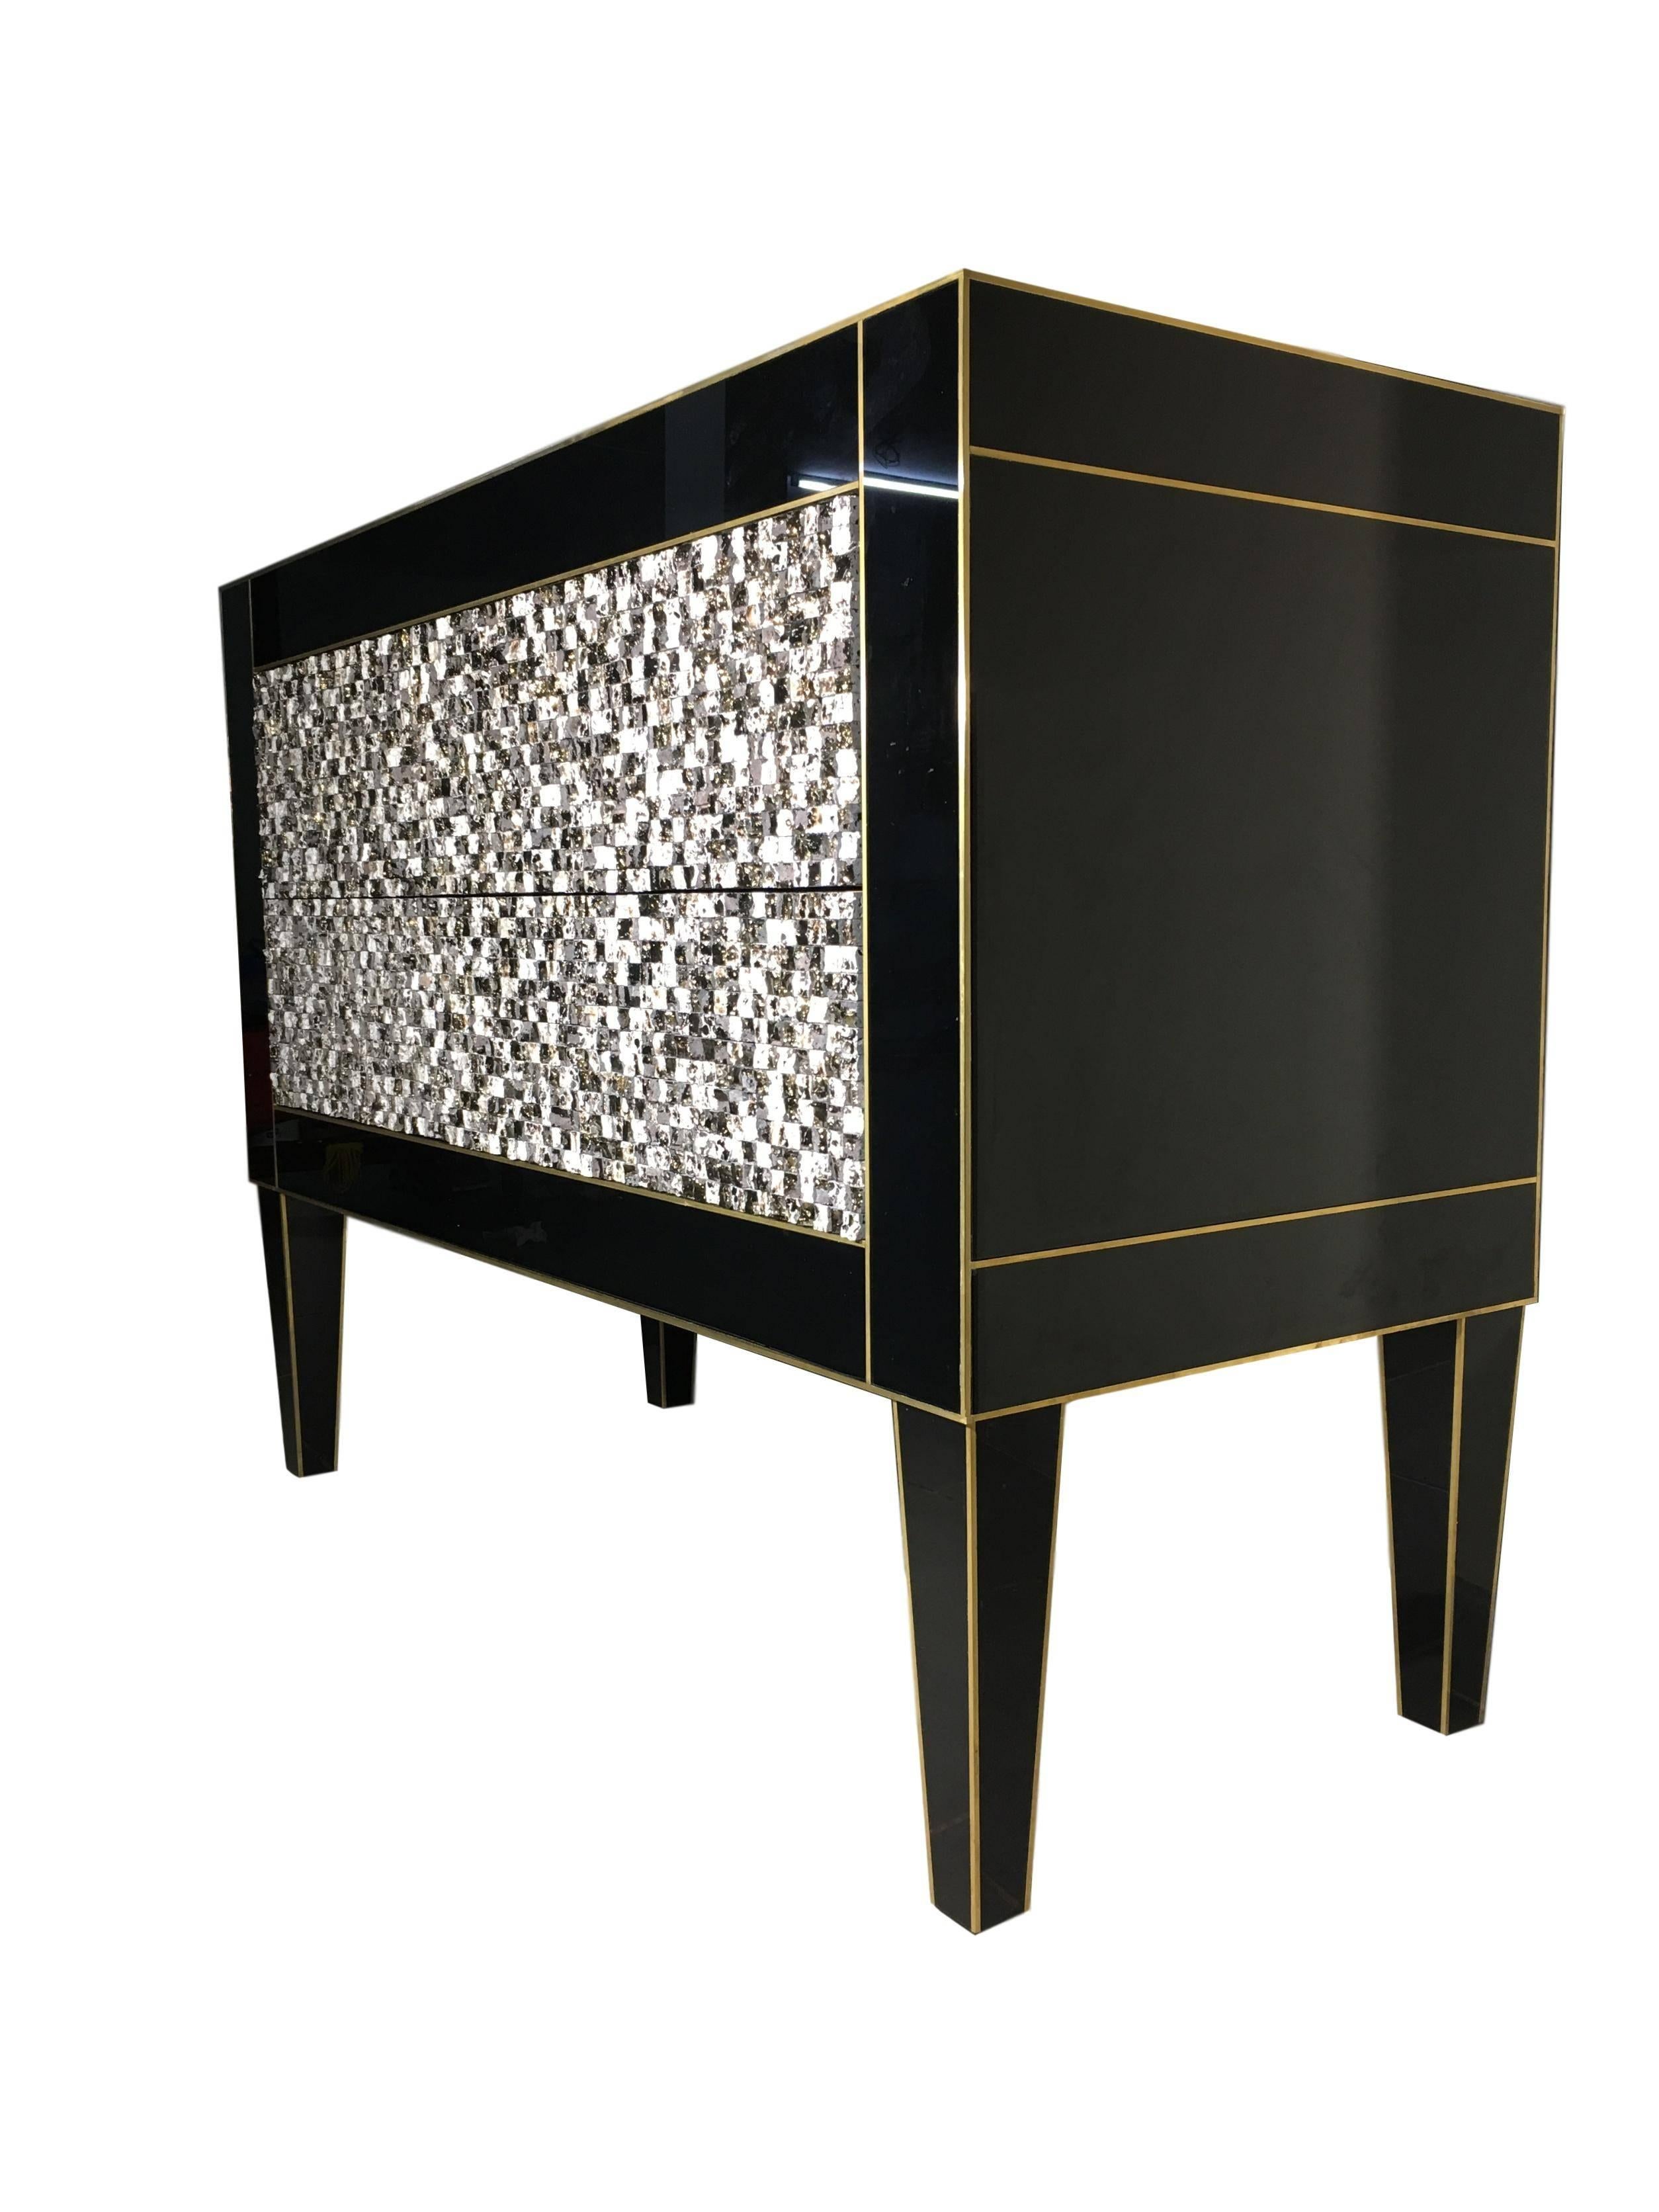 21st century handmade mirrored commode or chest of drawers in Murano glass and brass inlay with two drawers.
The chest are made of wood covered with colored Murano glass panels and push system hardware for open the drawers for more comfort in